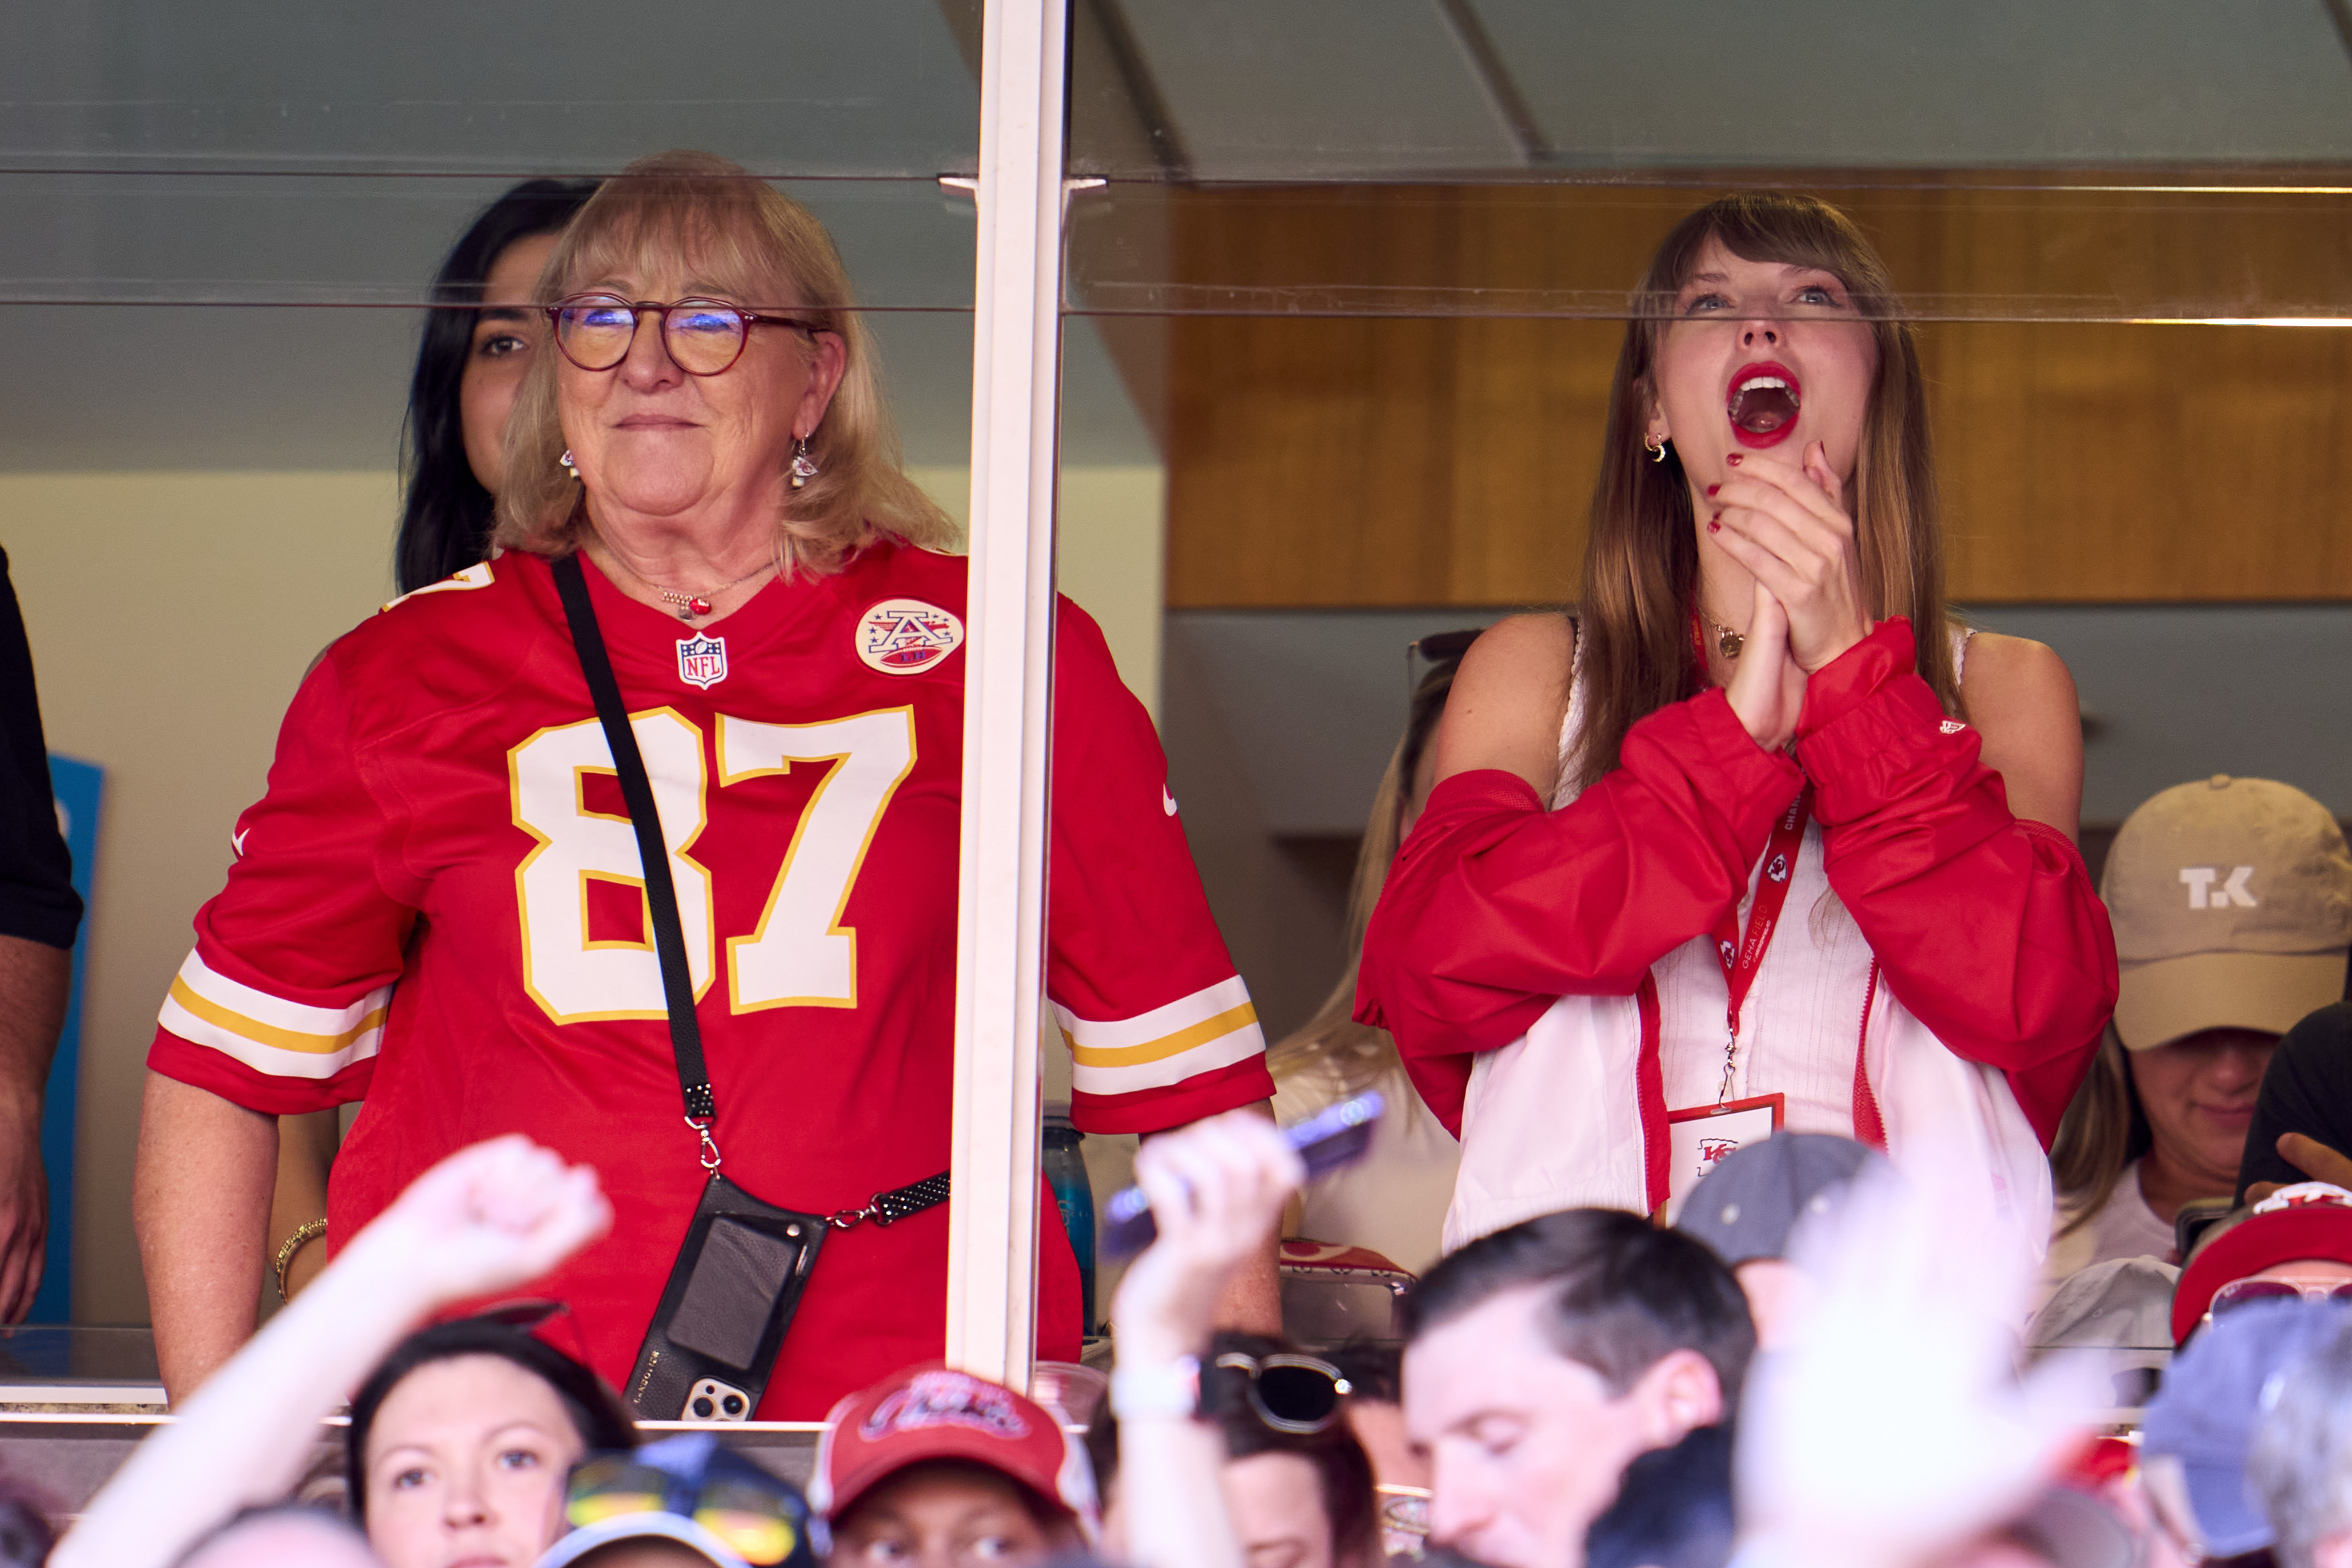 taylor cheering with travis&#x27; mom